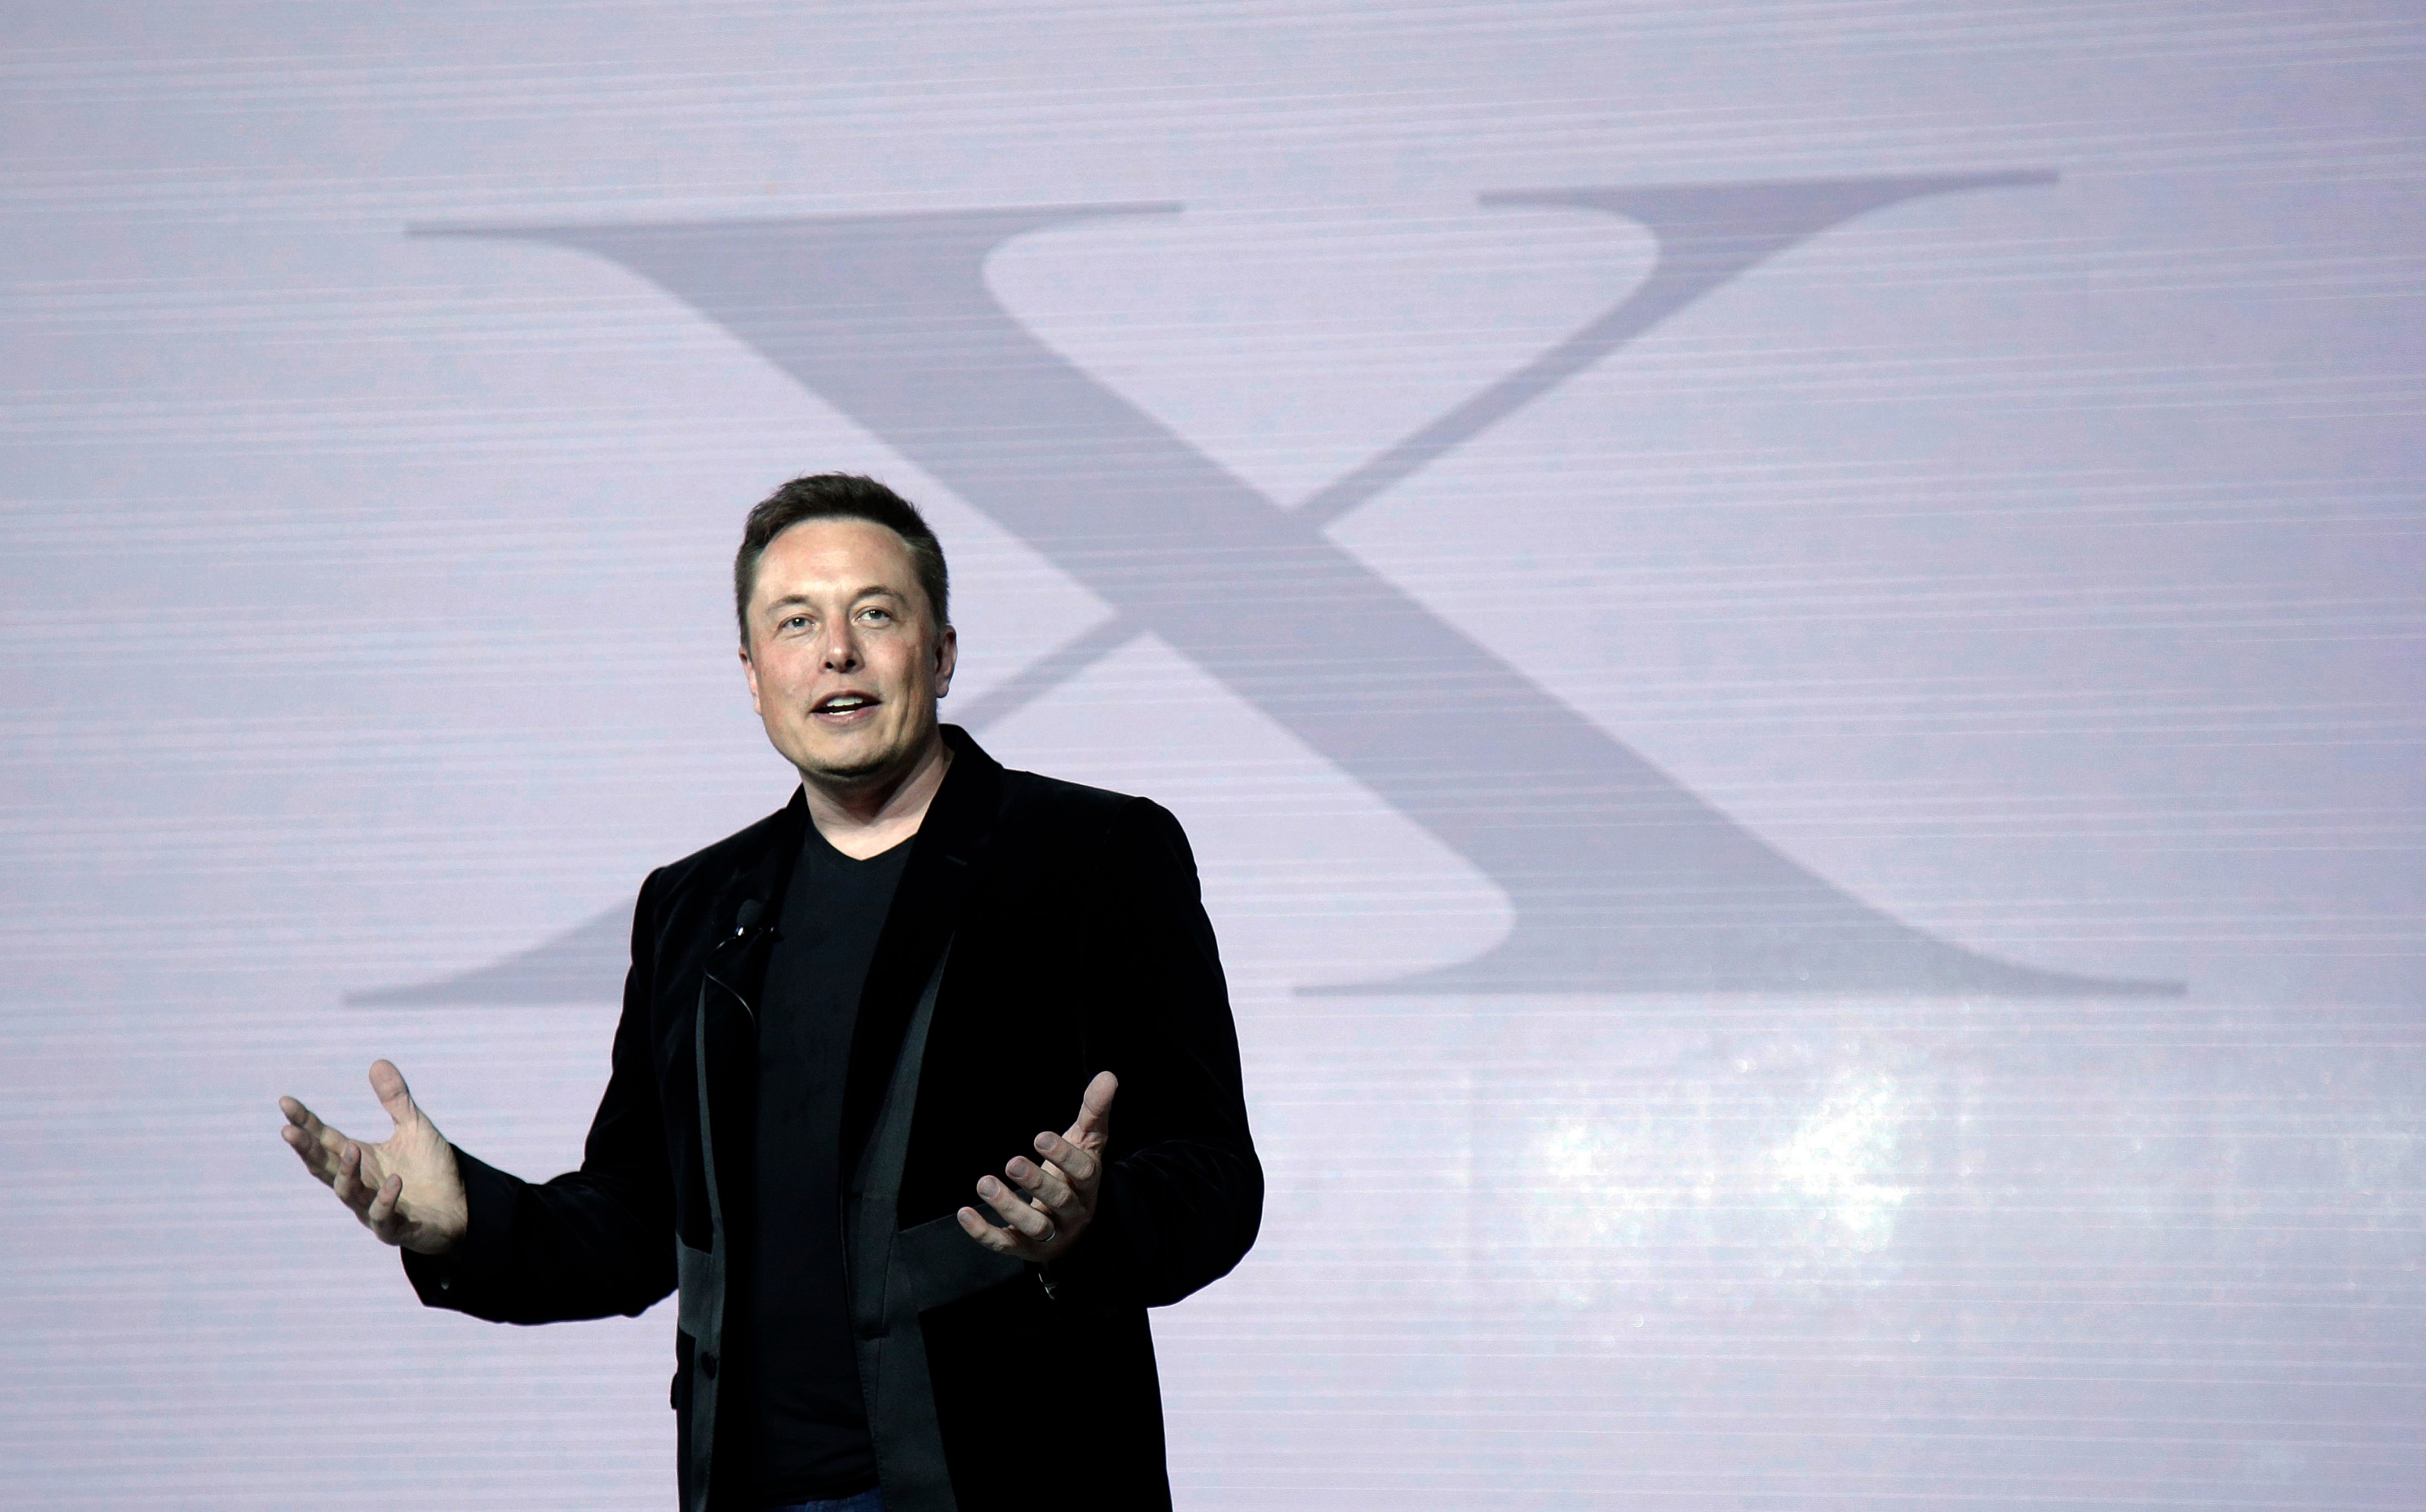 Elon Musk stands on a state with X in the background.